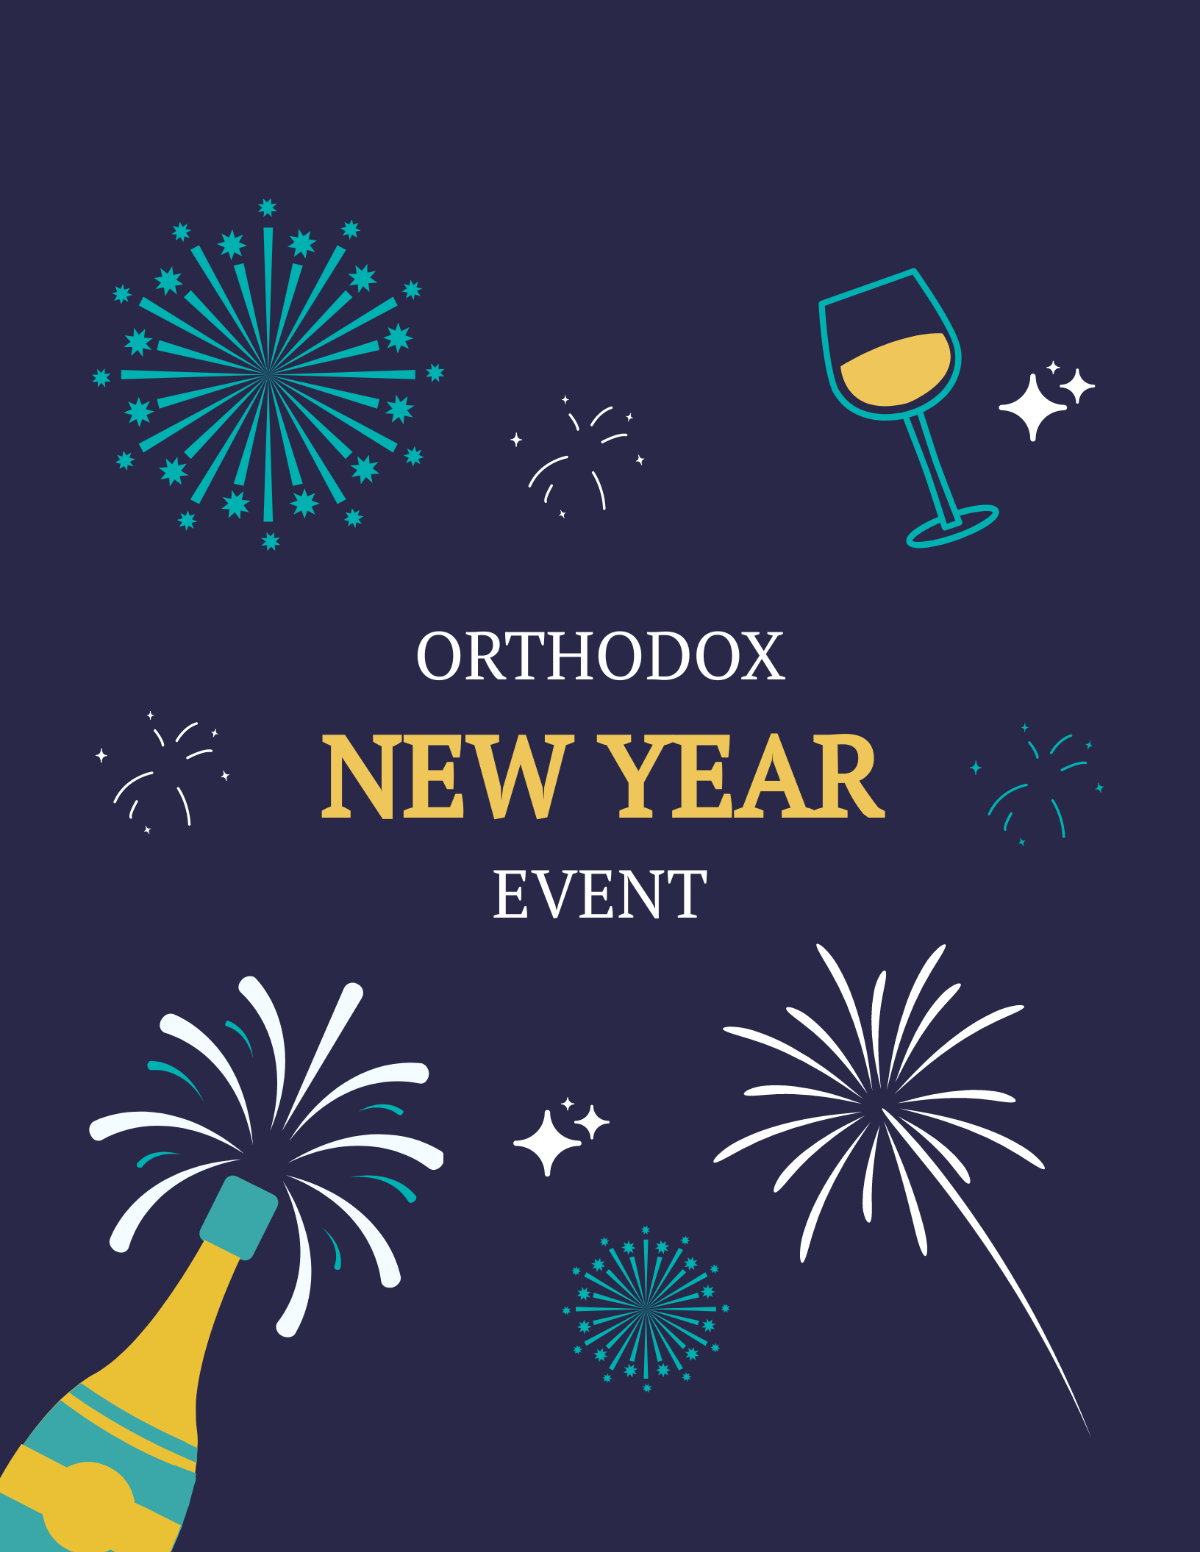 Free Orthodox New Year Event Flyer Template